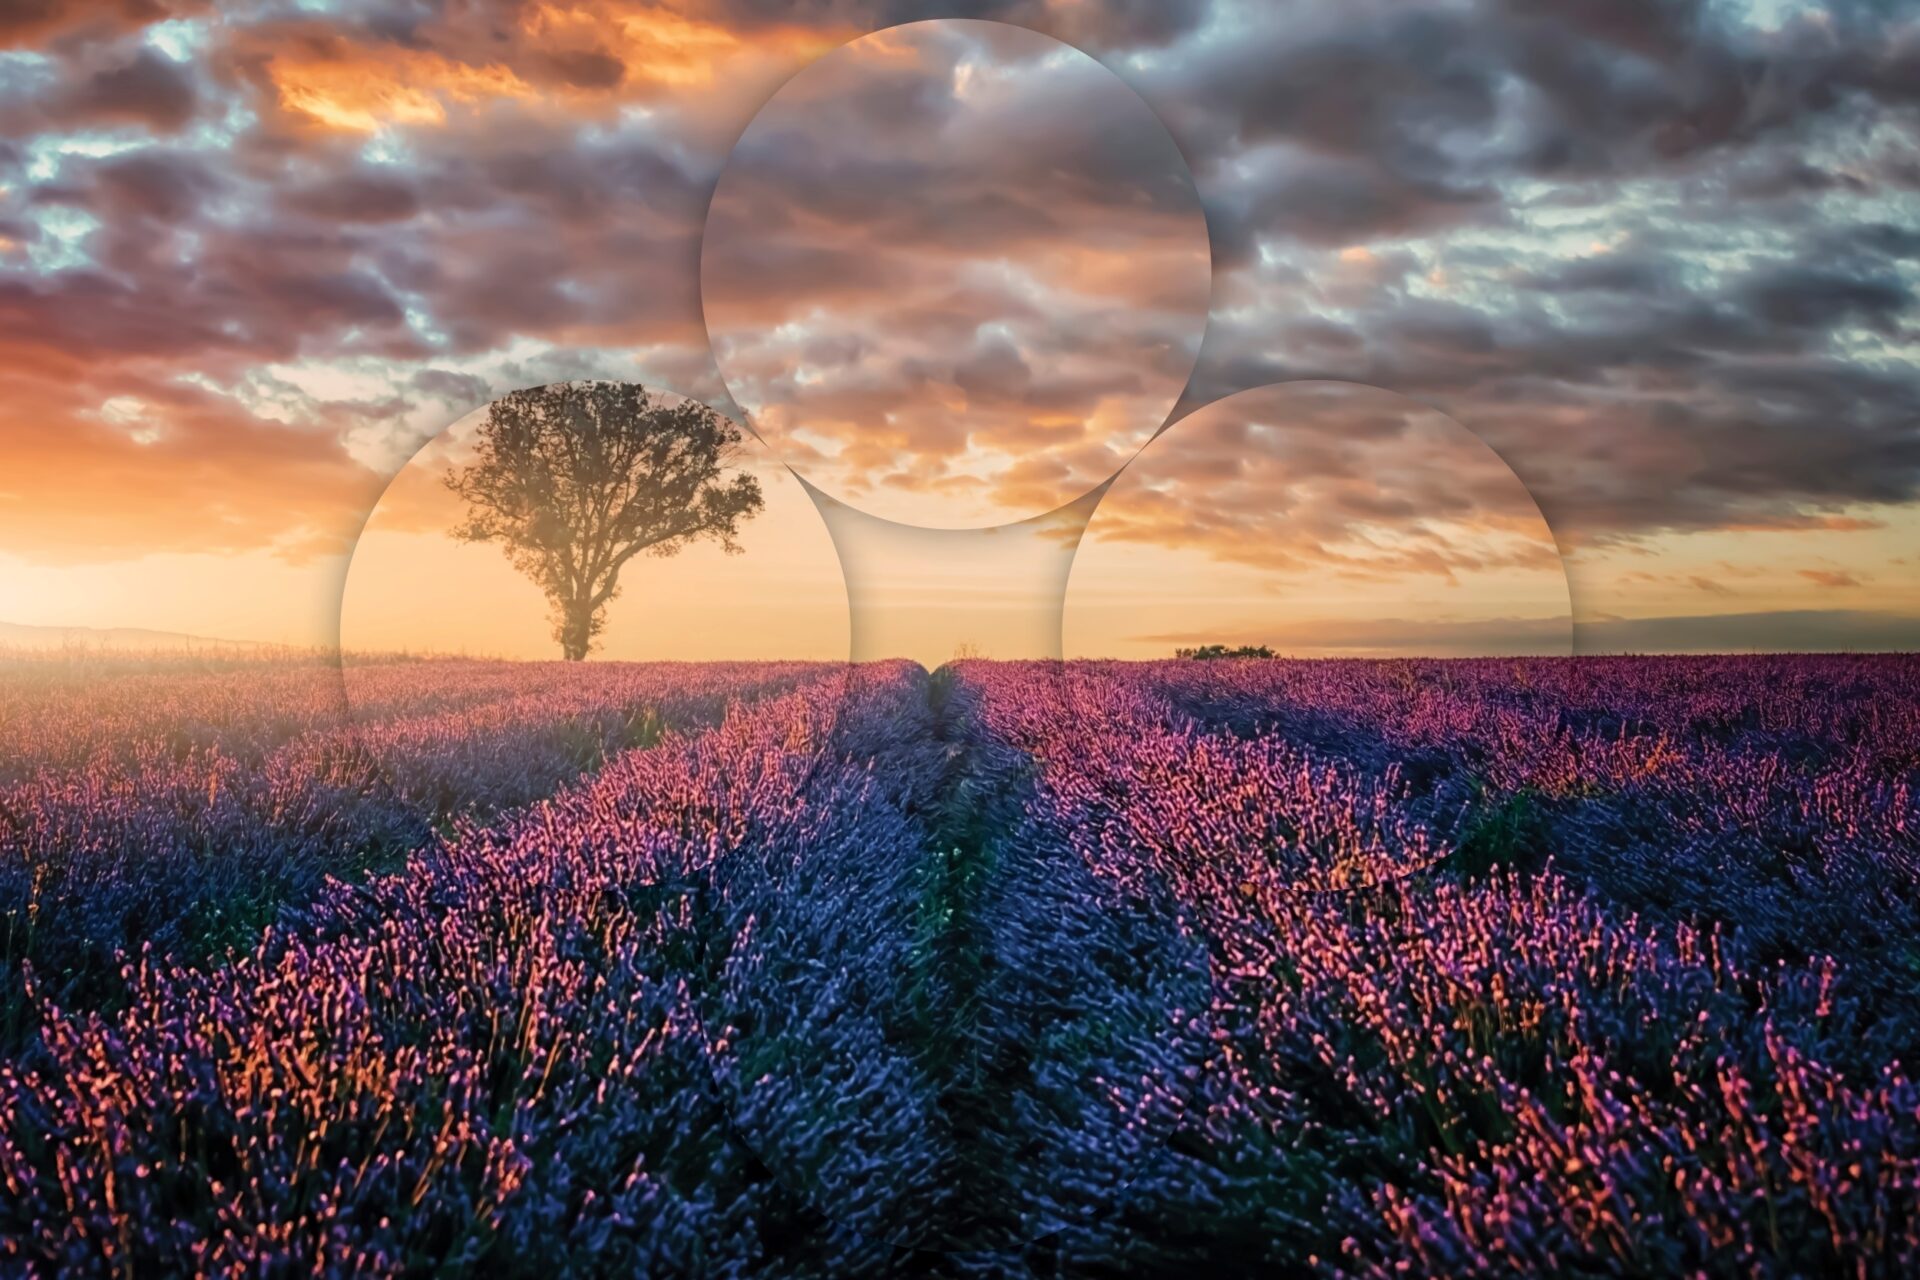 Field of lavender with a setting sun and tree in the distance